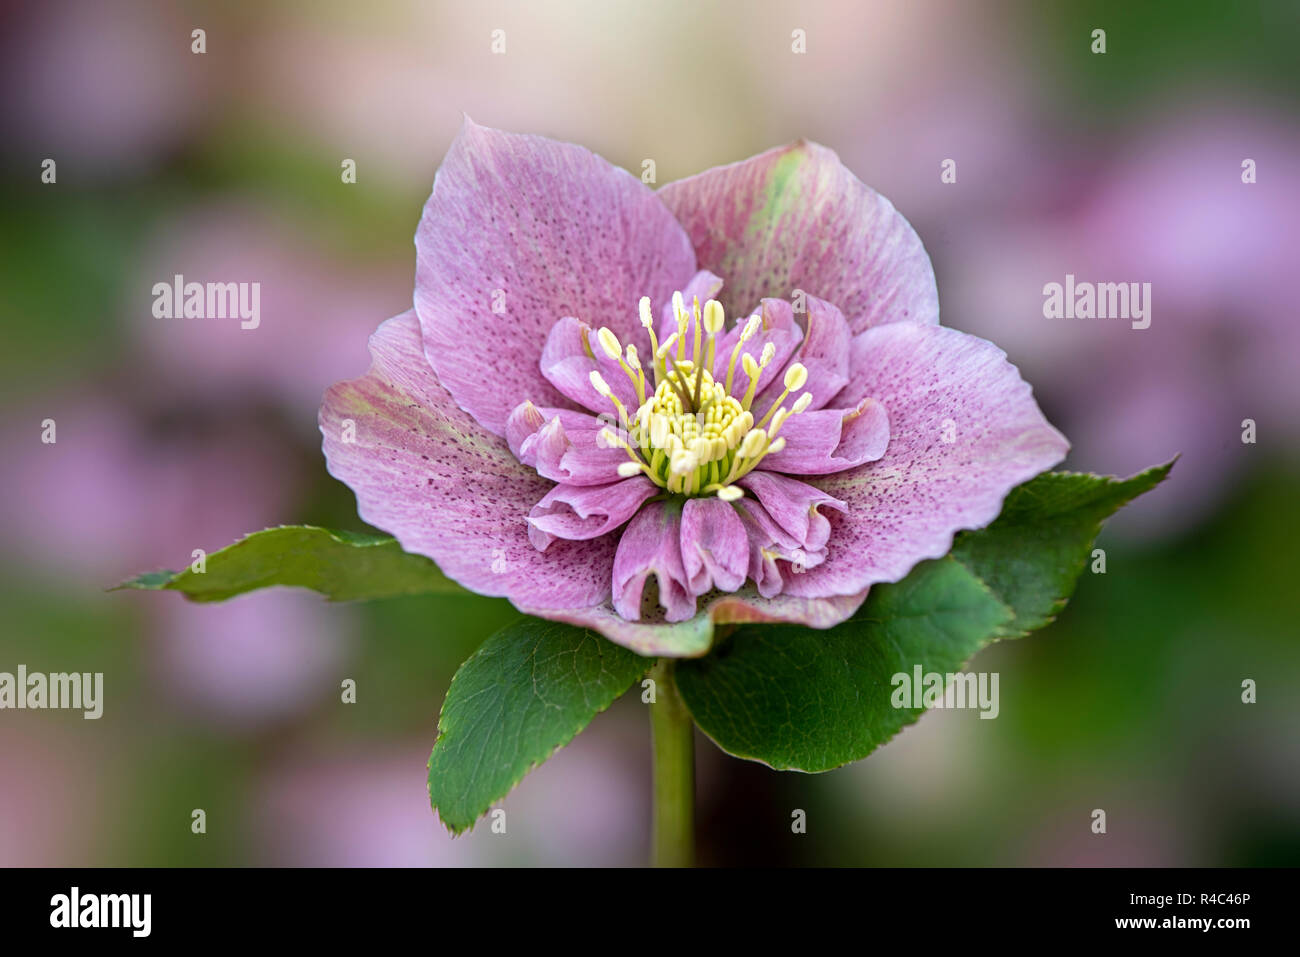 Close-up image of the beautiful pink, spring flowering Hellebore flower also known as the Lenten or Christmas Rose Stock Photo